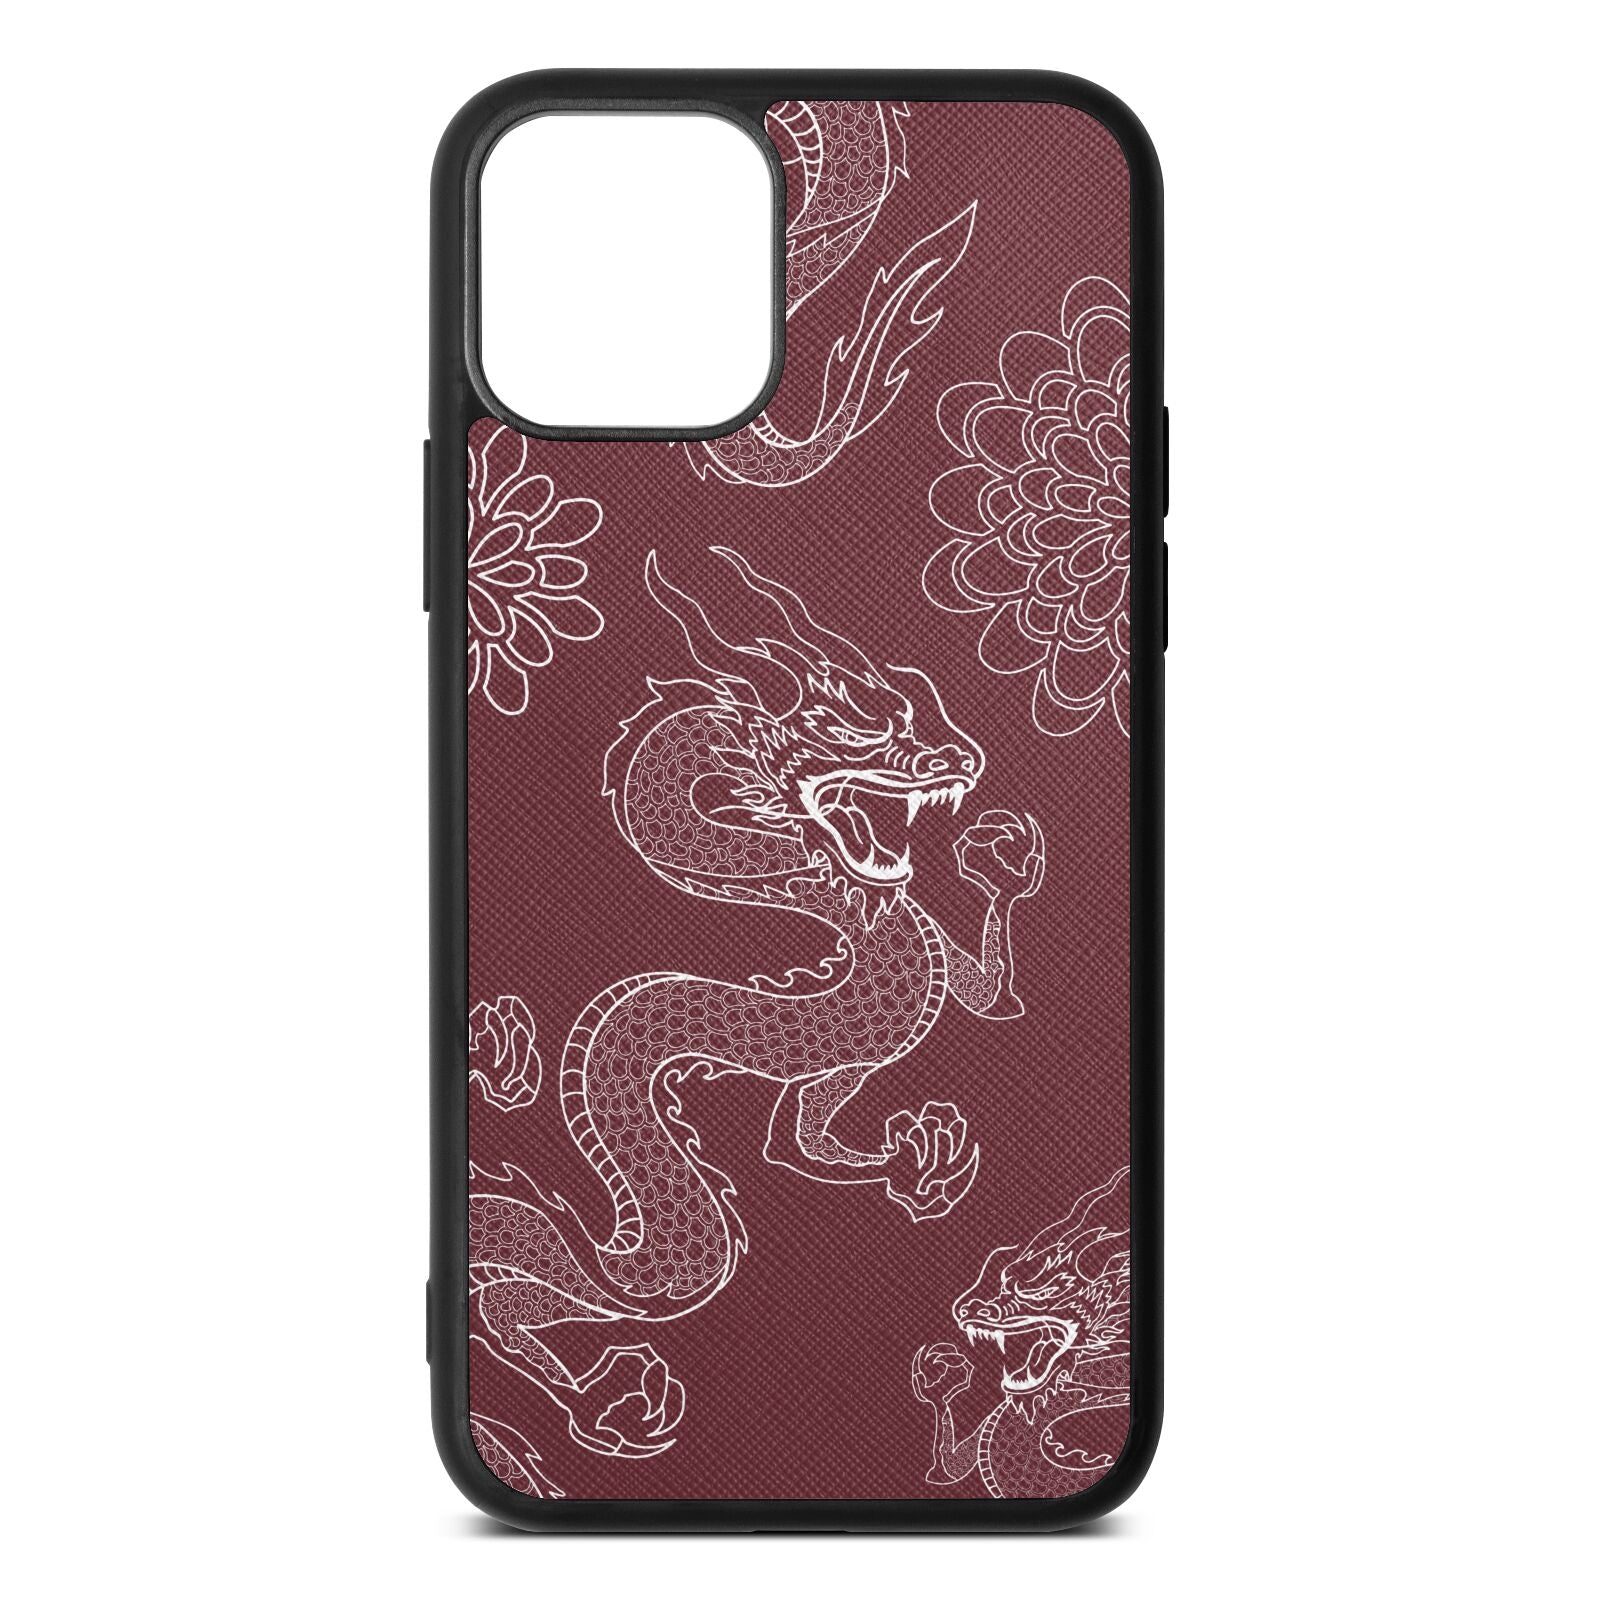 Dragons Rose Brown Saffiano Leather iPhone 11 Case